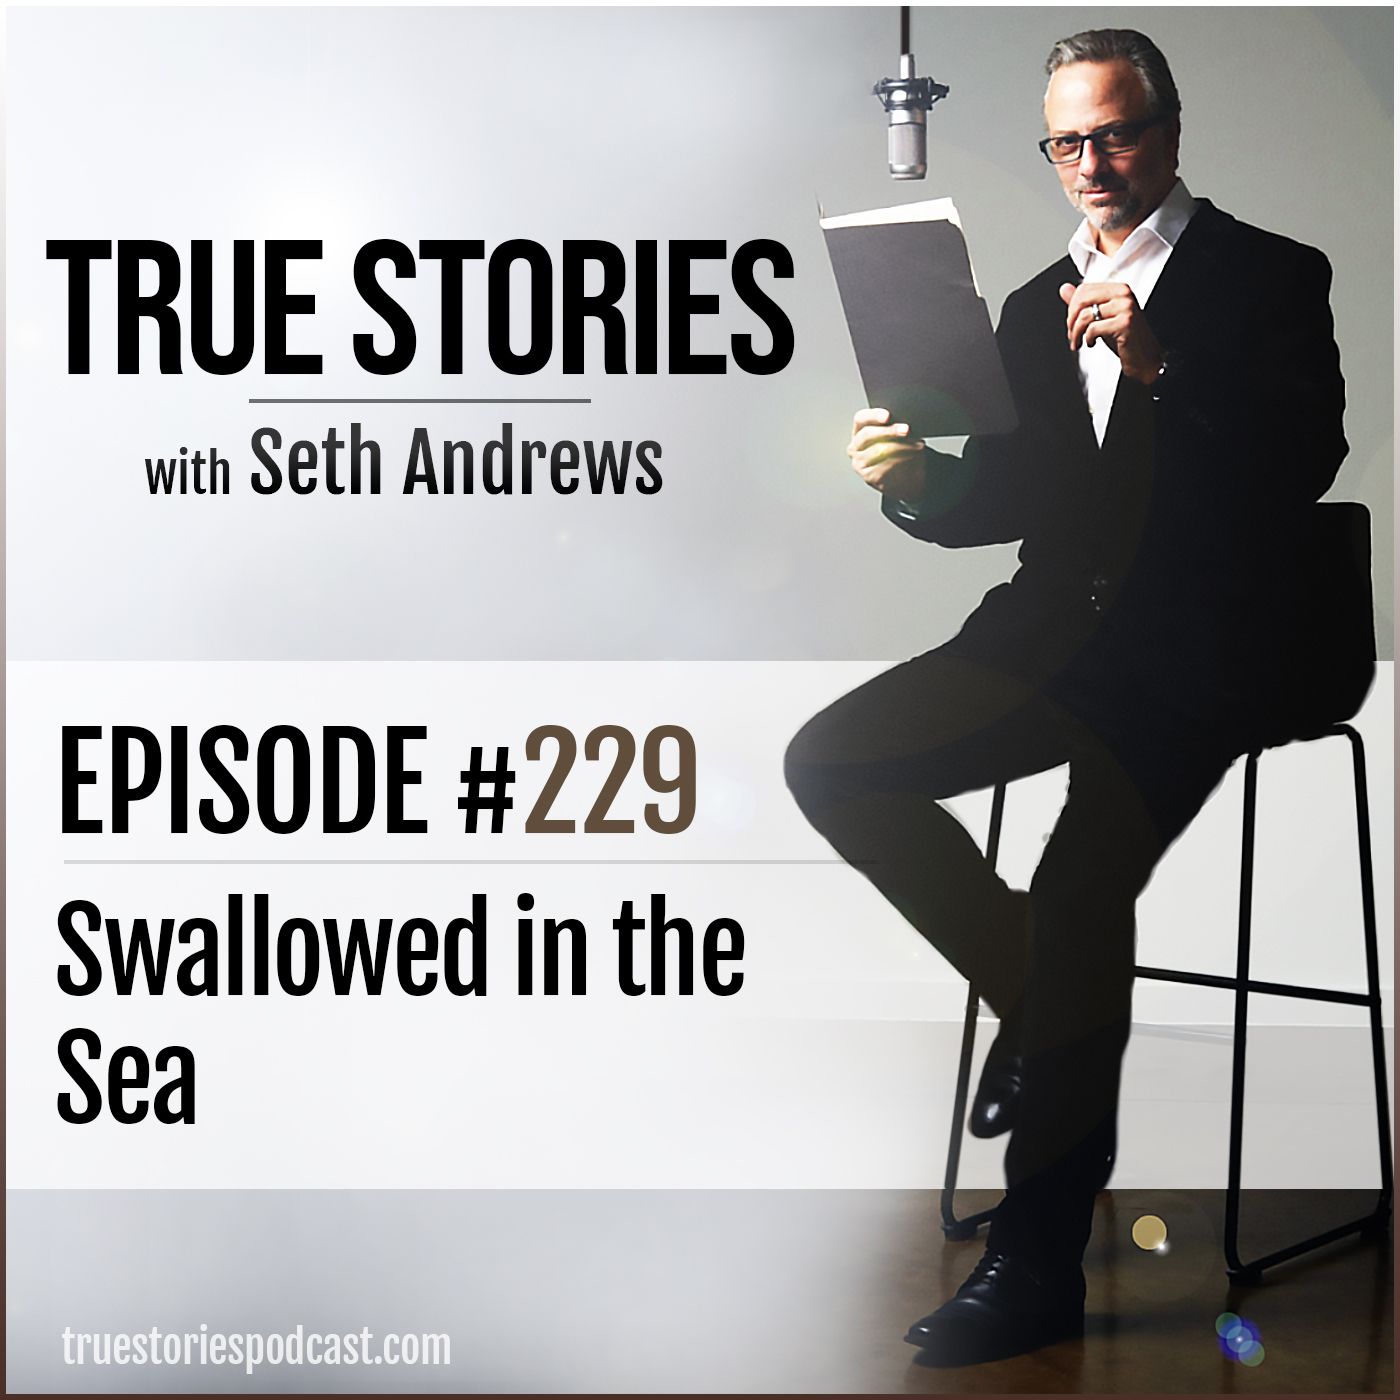 True Stories #229 - Swallowed in the Sea